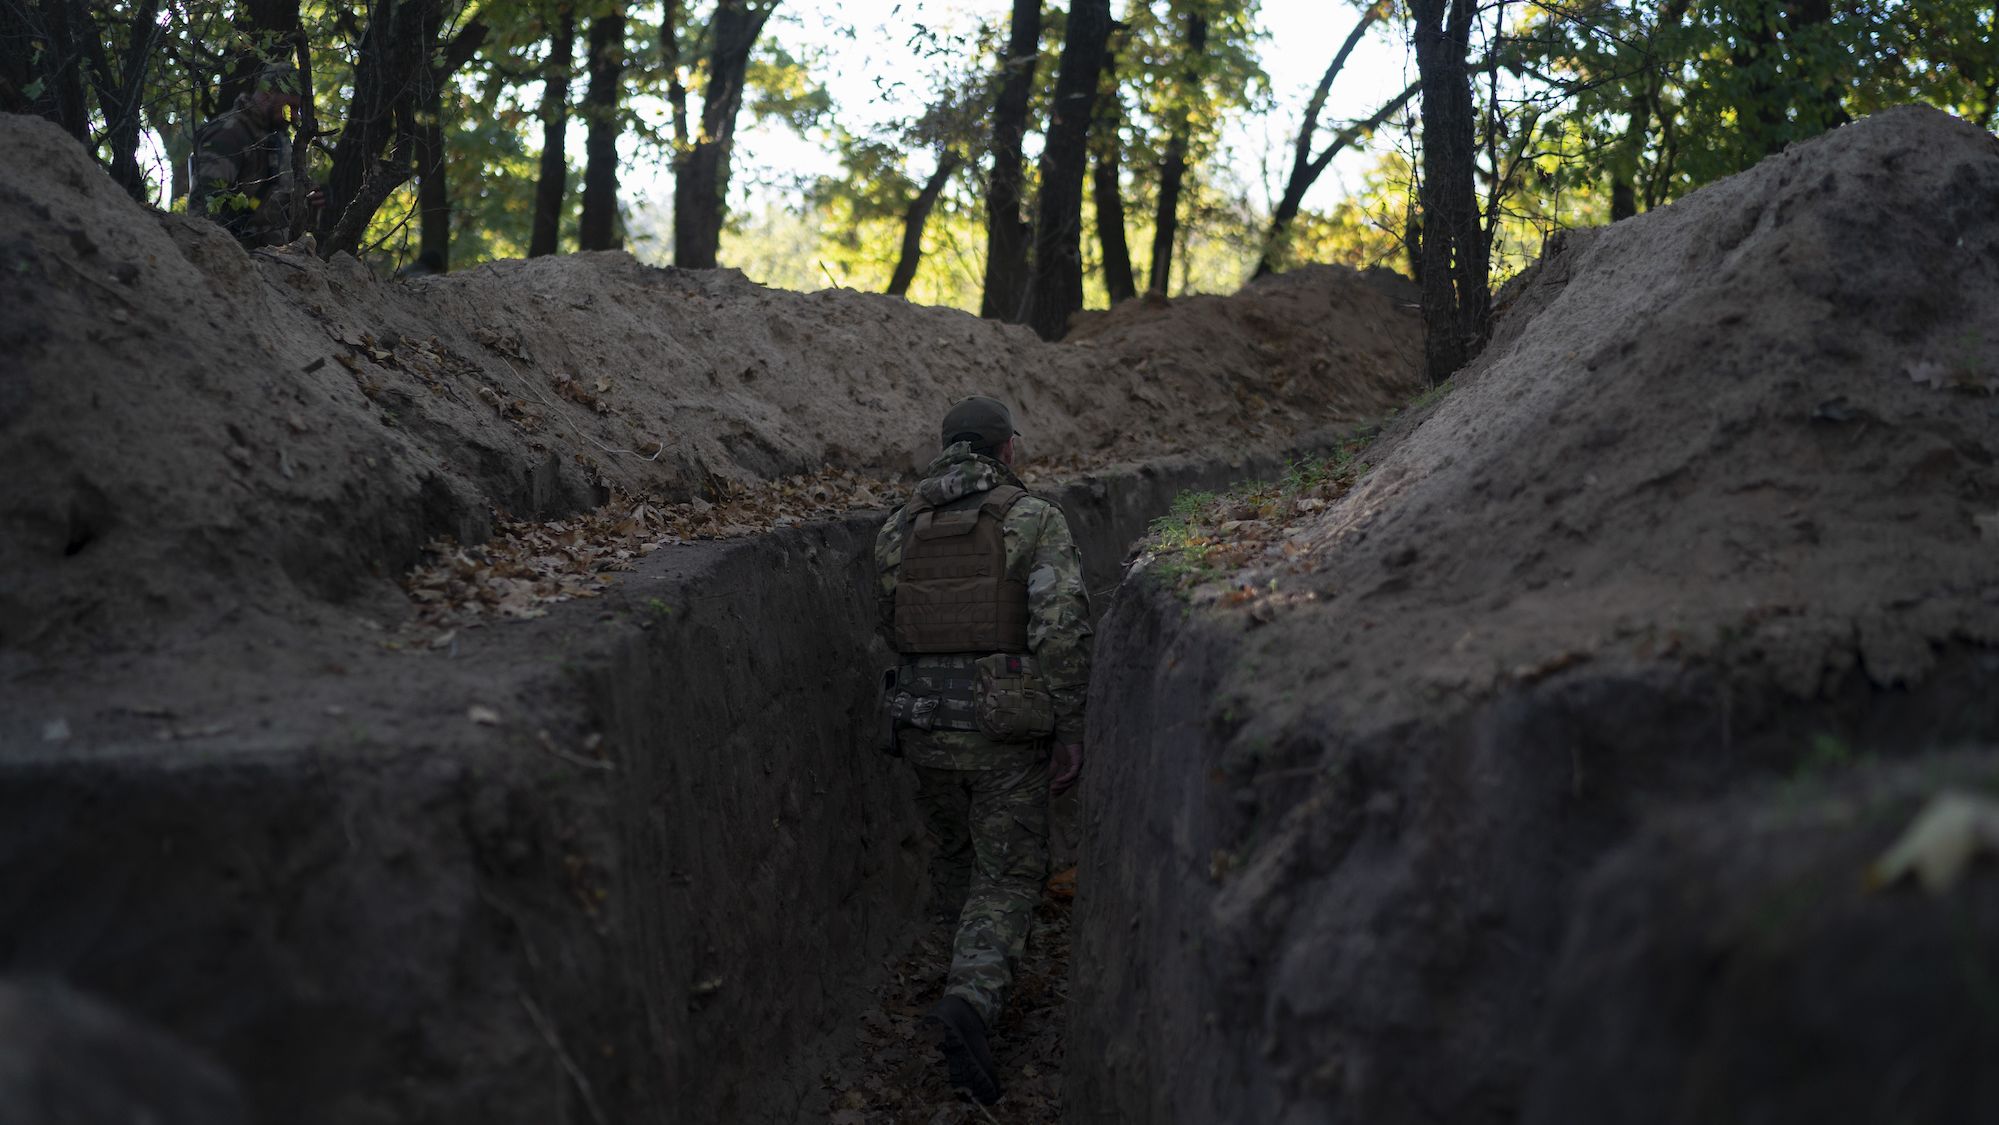 A Ukrainian soldier checks a trench dug by Russian soldiers in a retaken area of the Kherson region on October 12.